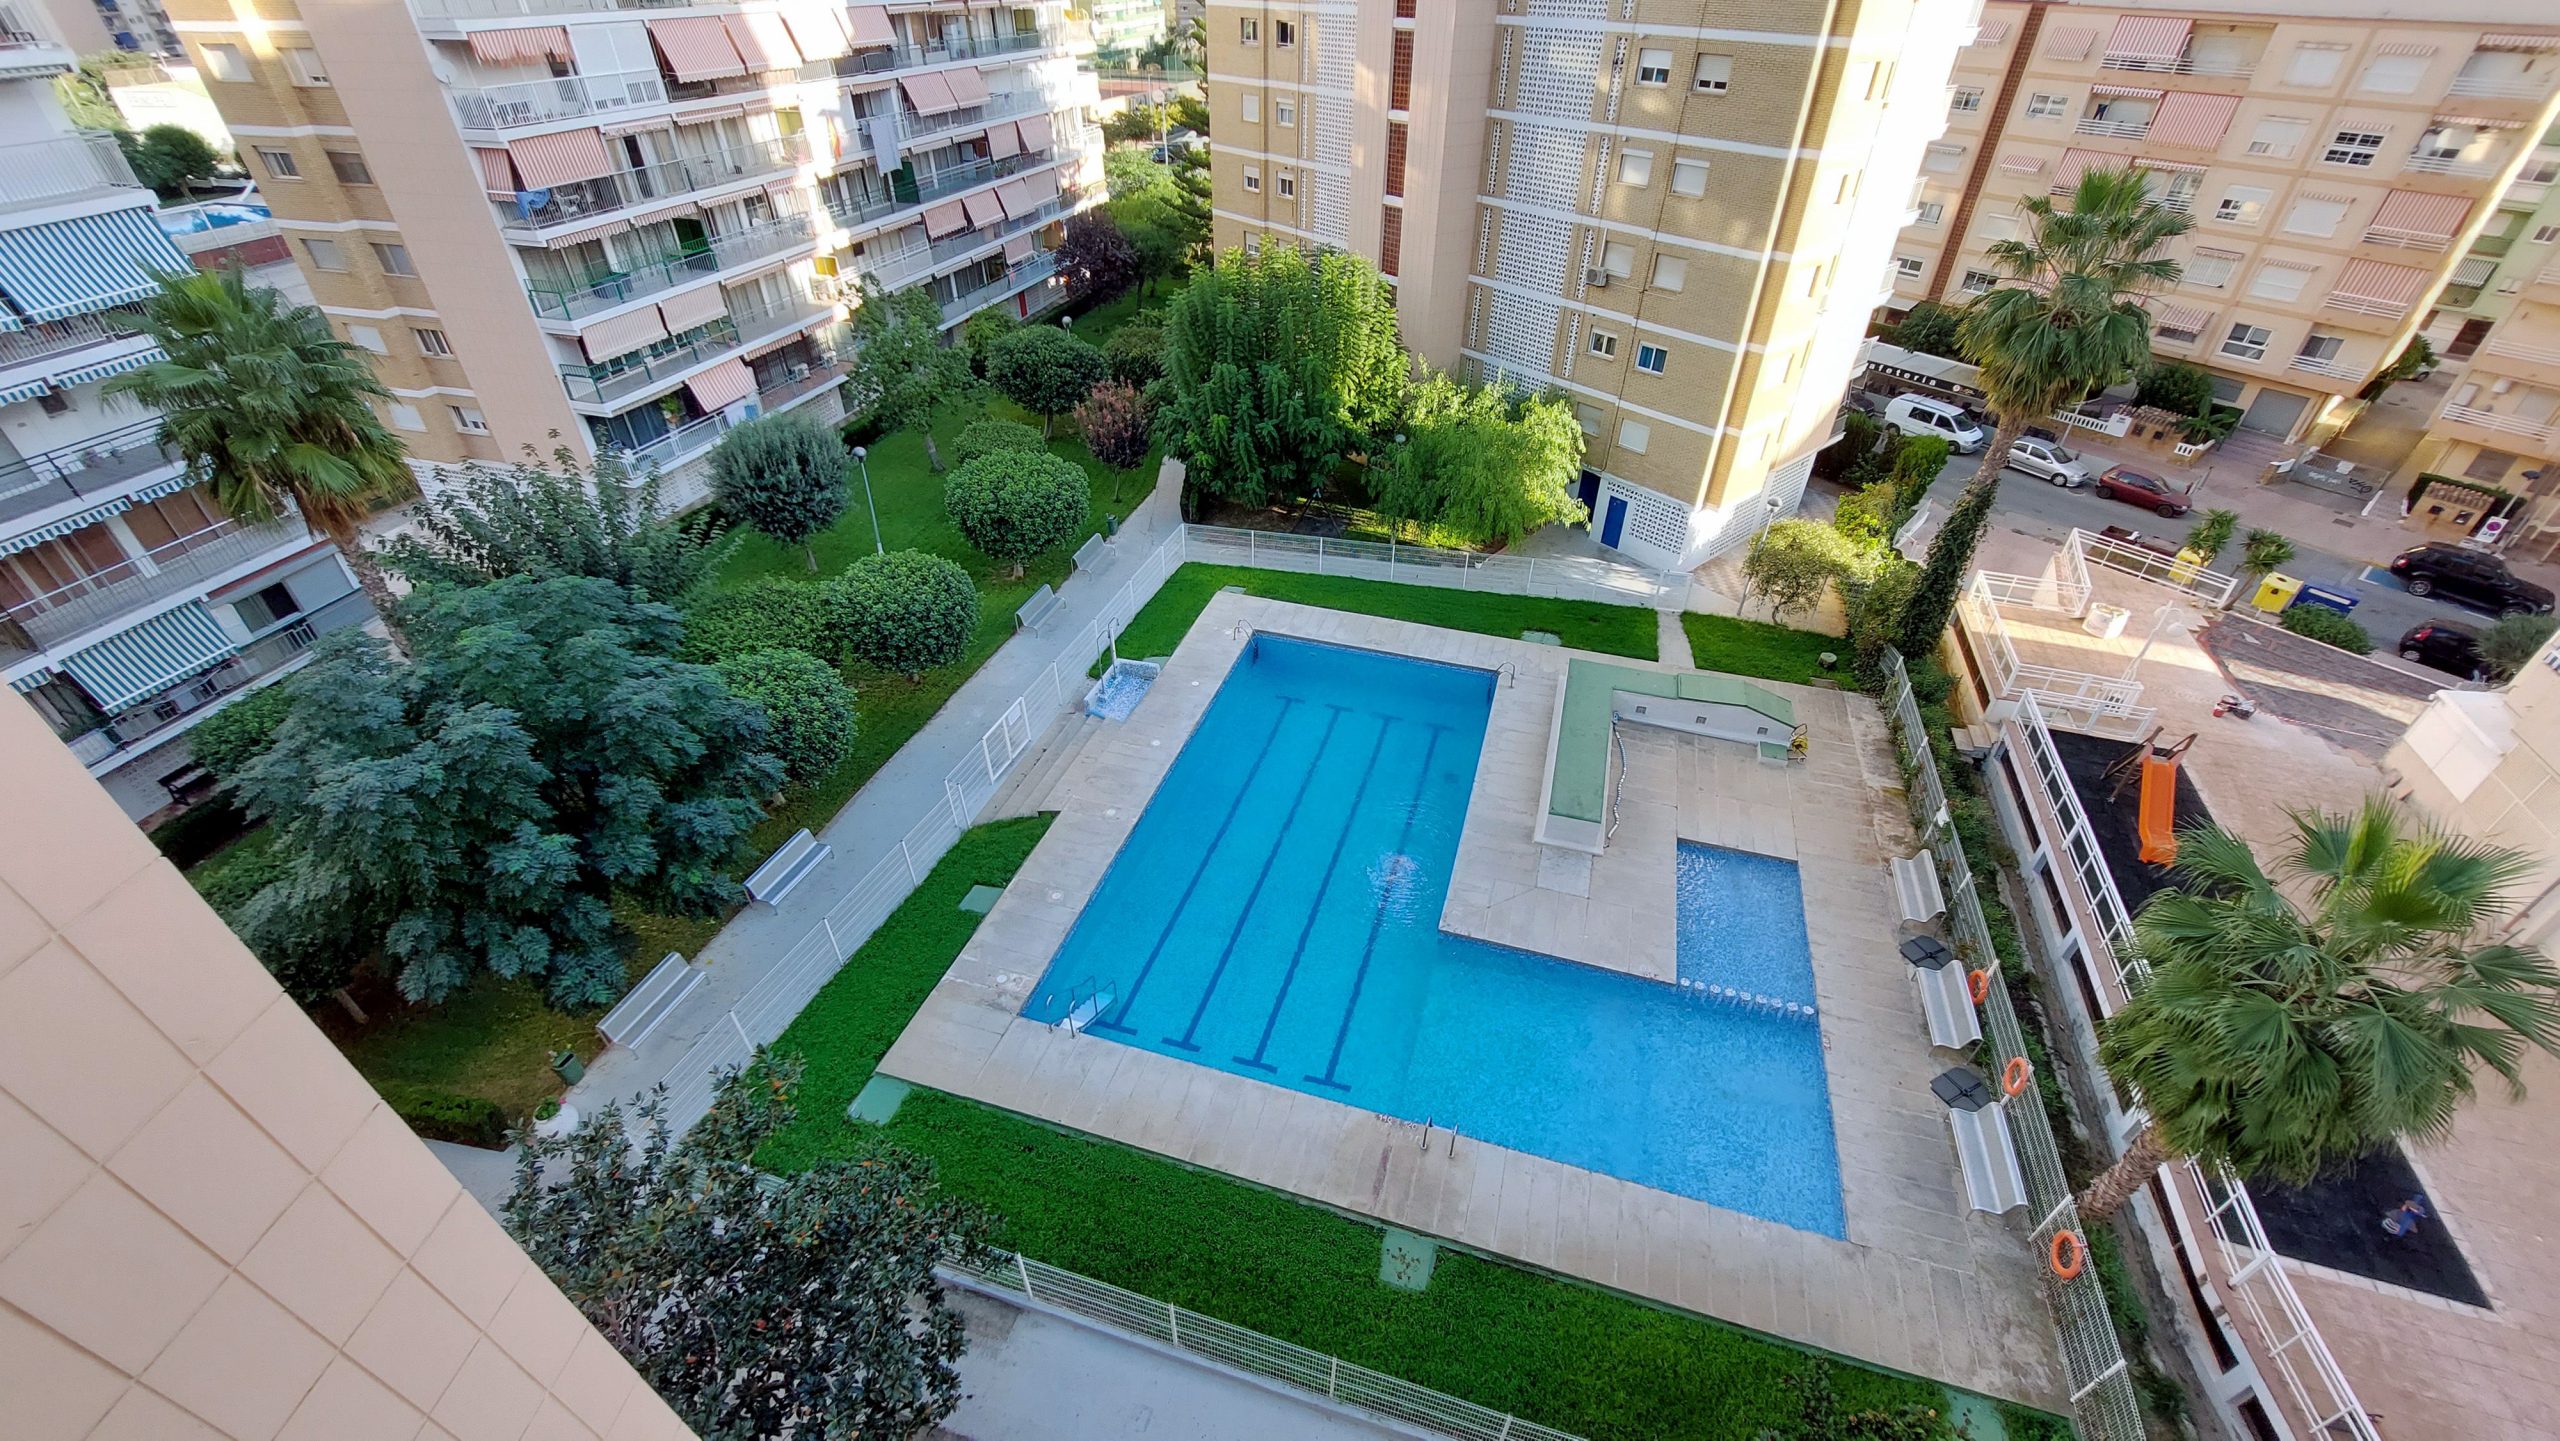 Farnals - lovely flat with pool for rent